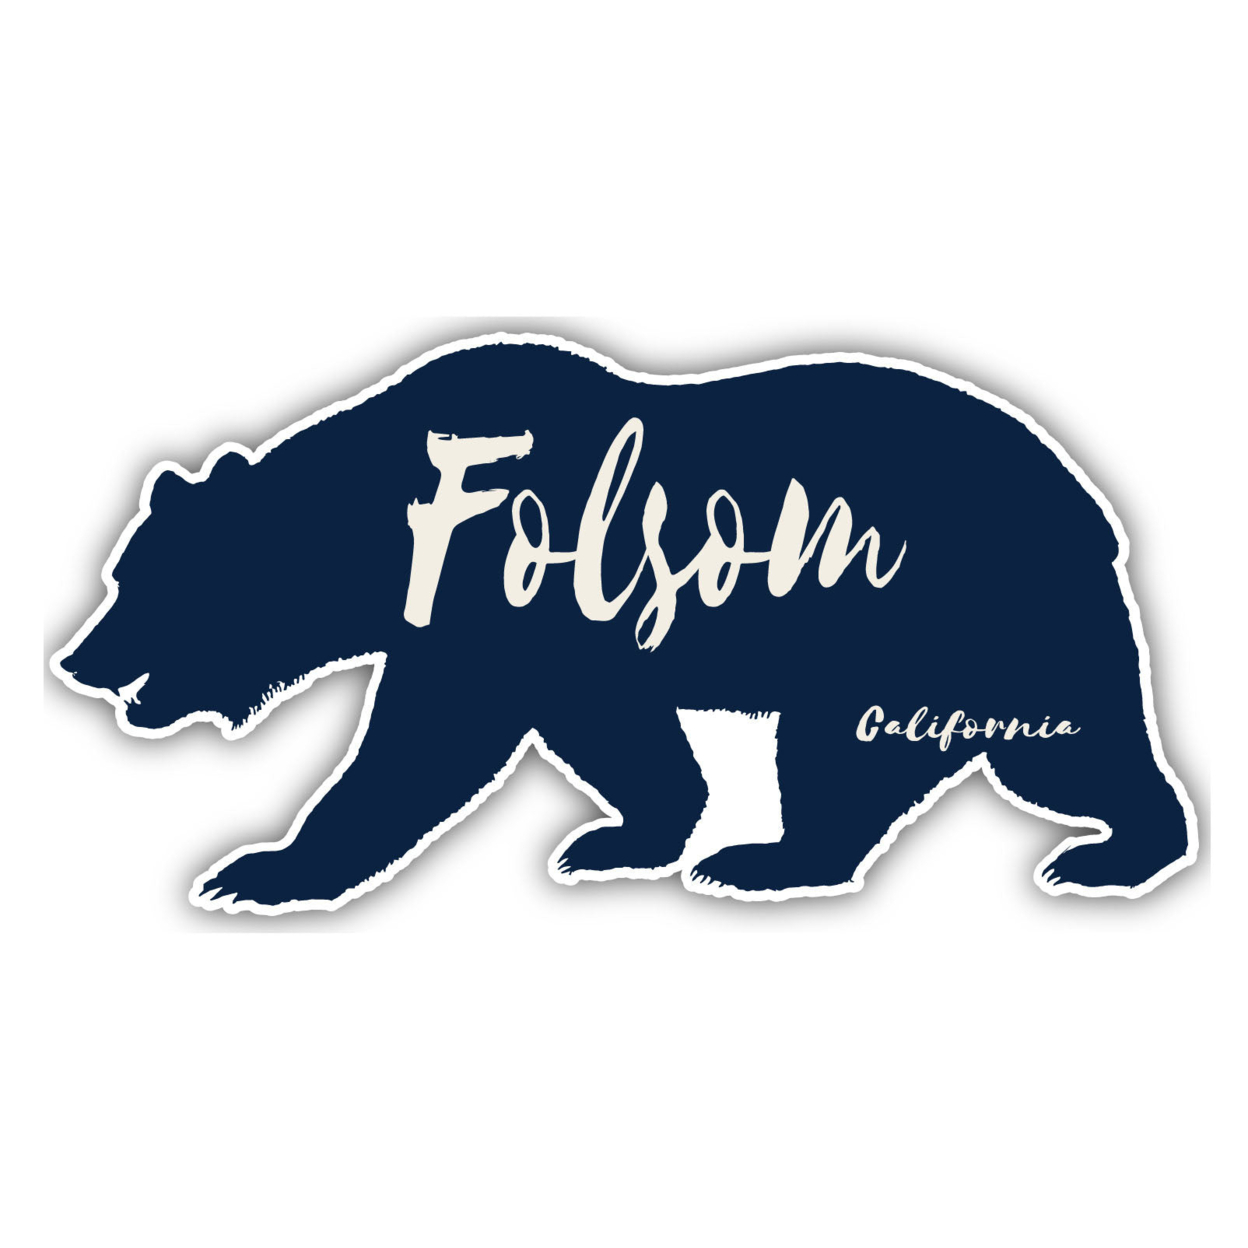 Folsom California Souvenir Decorative Stickers (Choose Theme And Size) - 4-Pack, 6-Inch, Camp Life